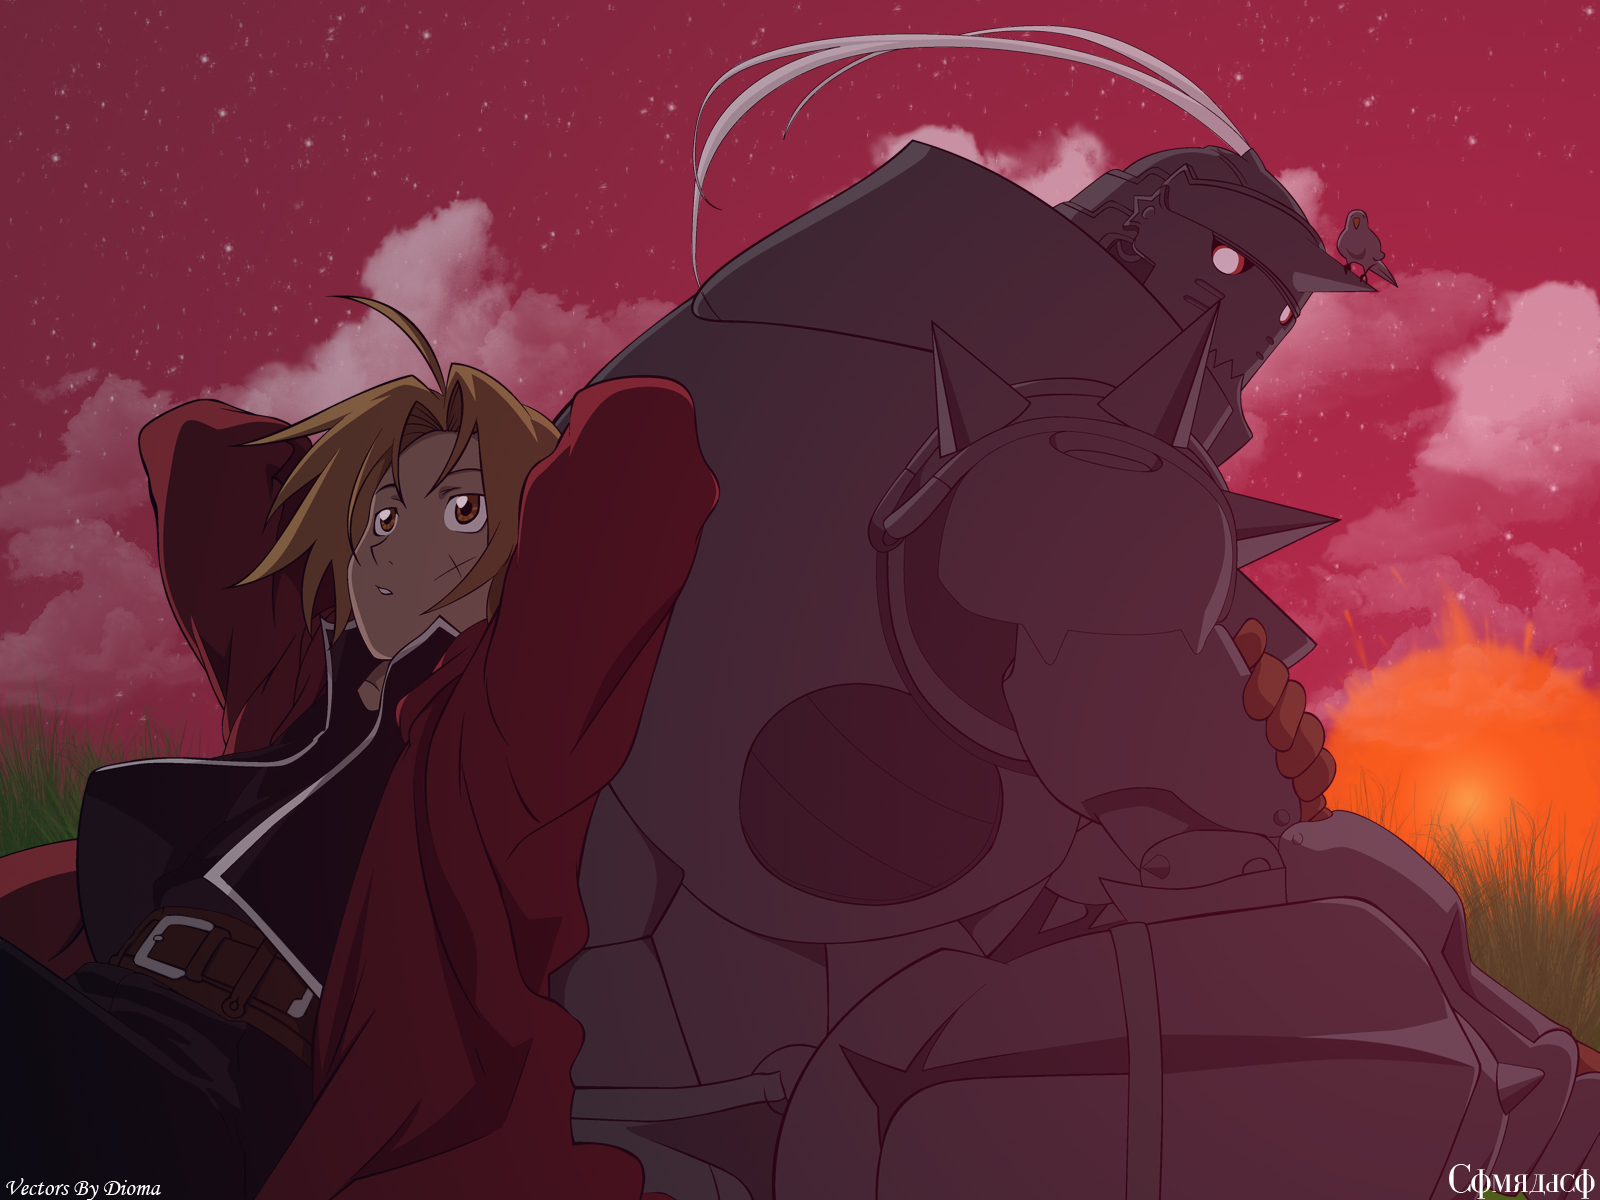 Edward Elric and Alphonse Elric in a captivating HD desktop wallpaper